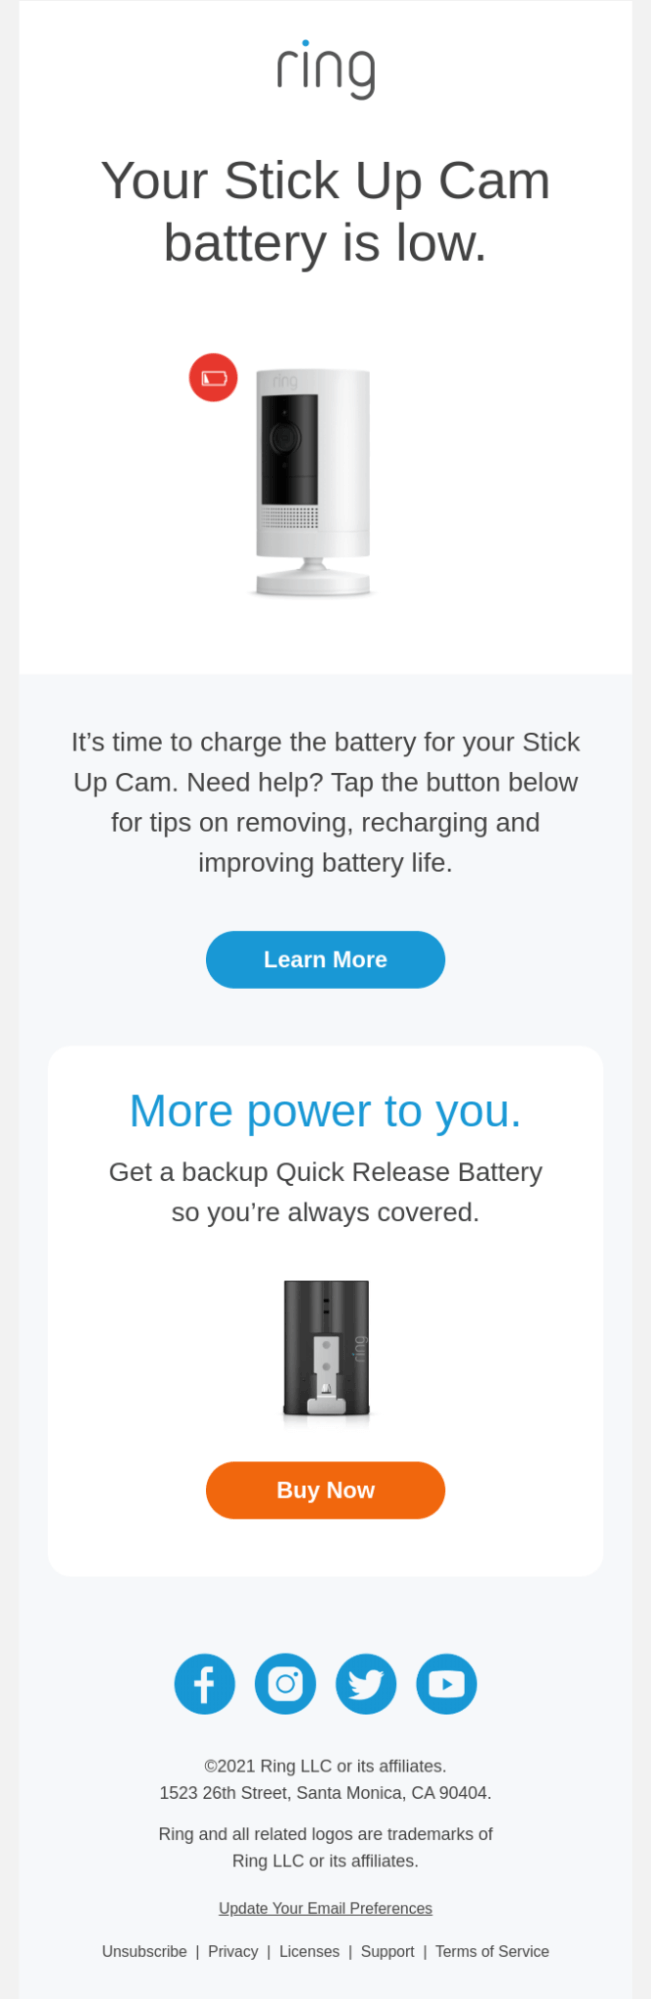 Ring email with “low battery” reminder and extra option to buy an upgraded battery